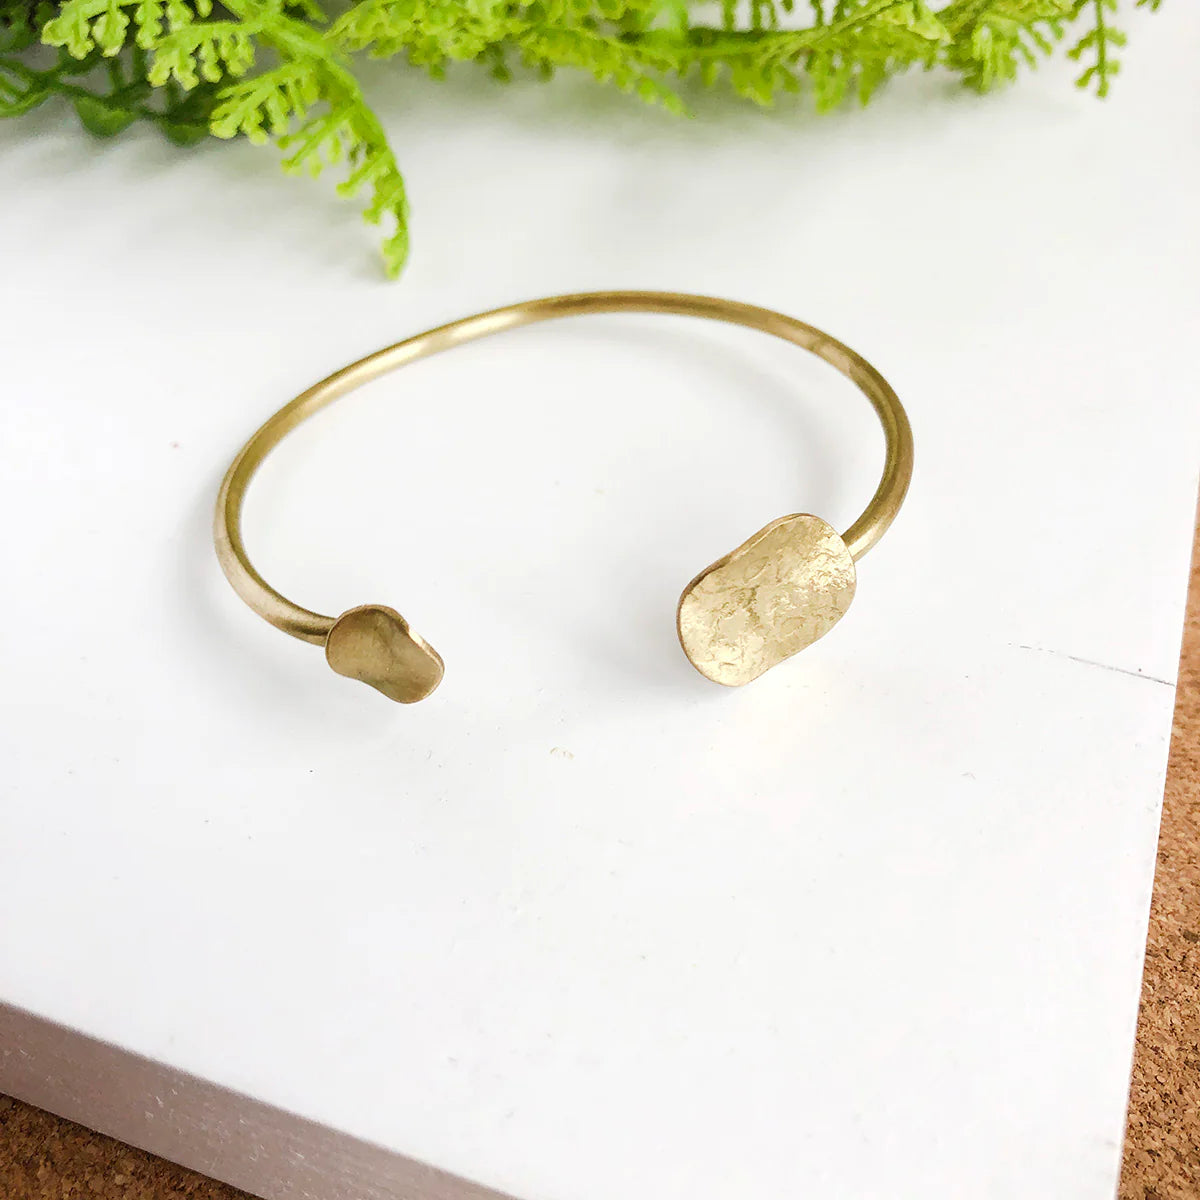 Angelco Accessories hammered coin cuff - gold - flatlay on white board with green fern